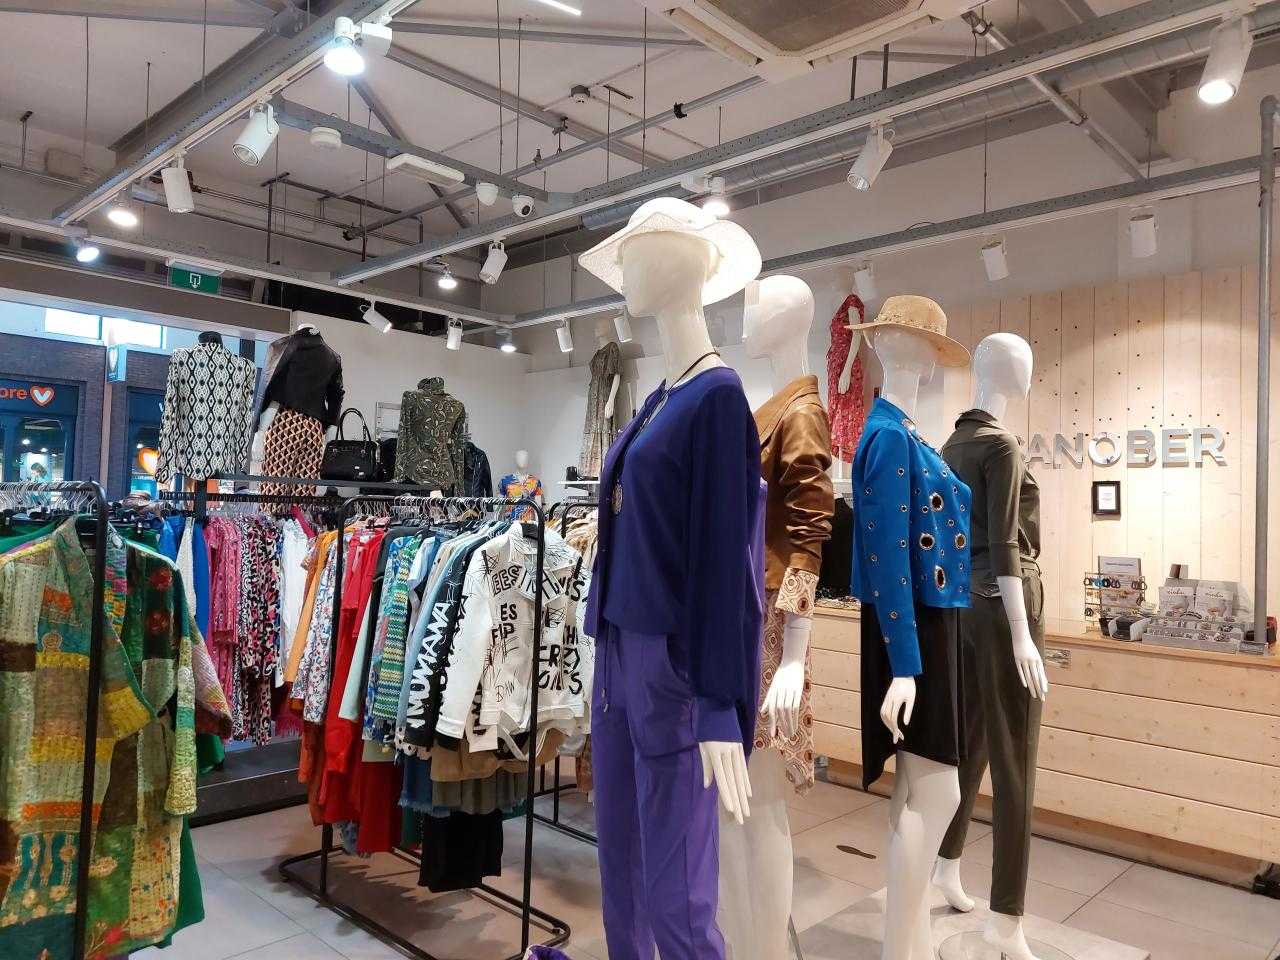 Shop interior with mannequins and clothes racks